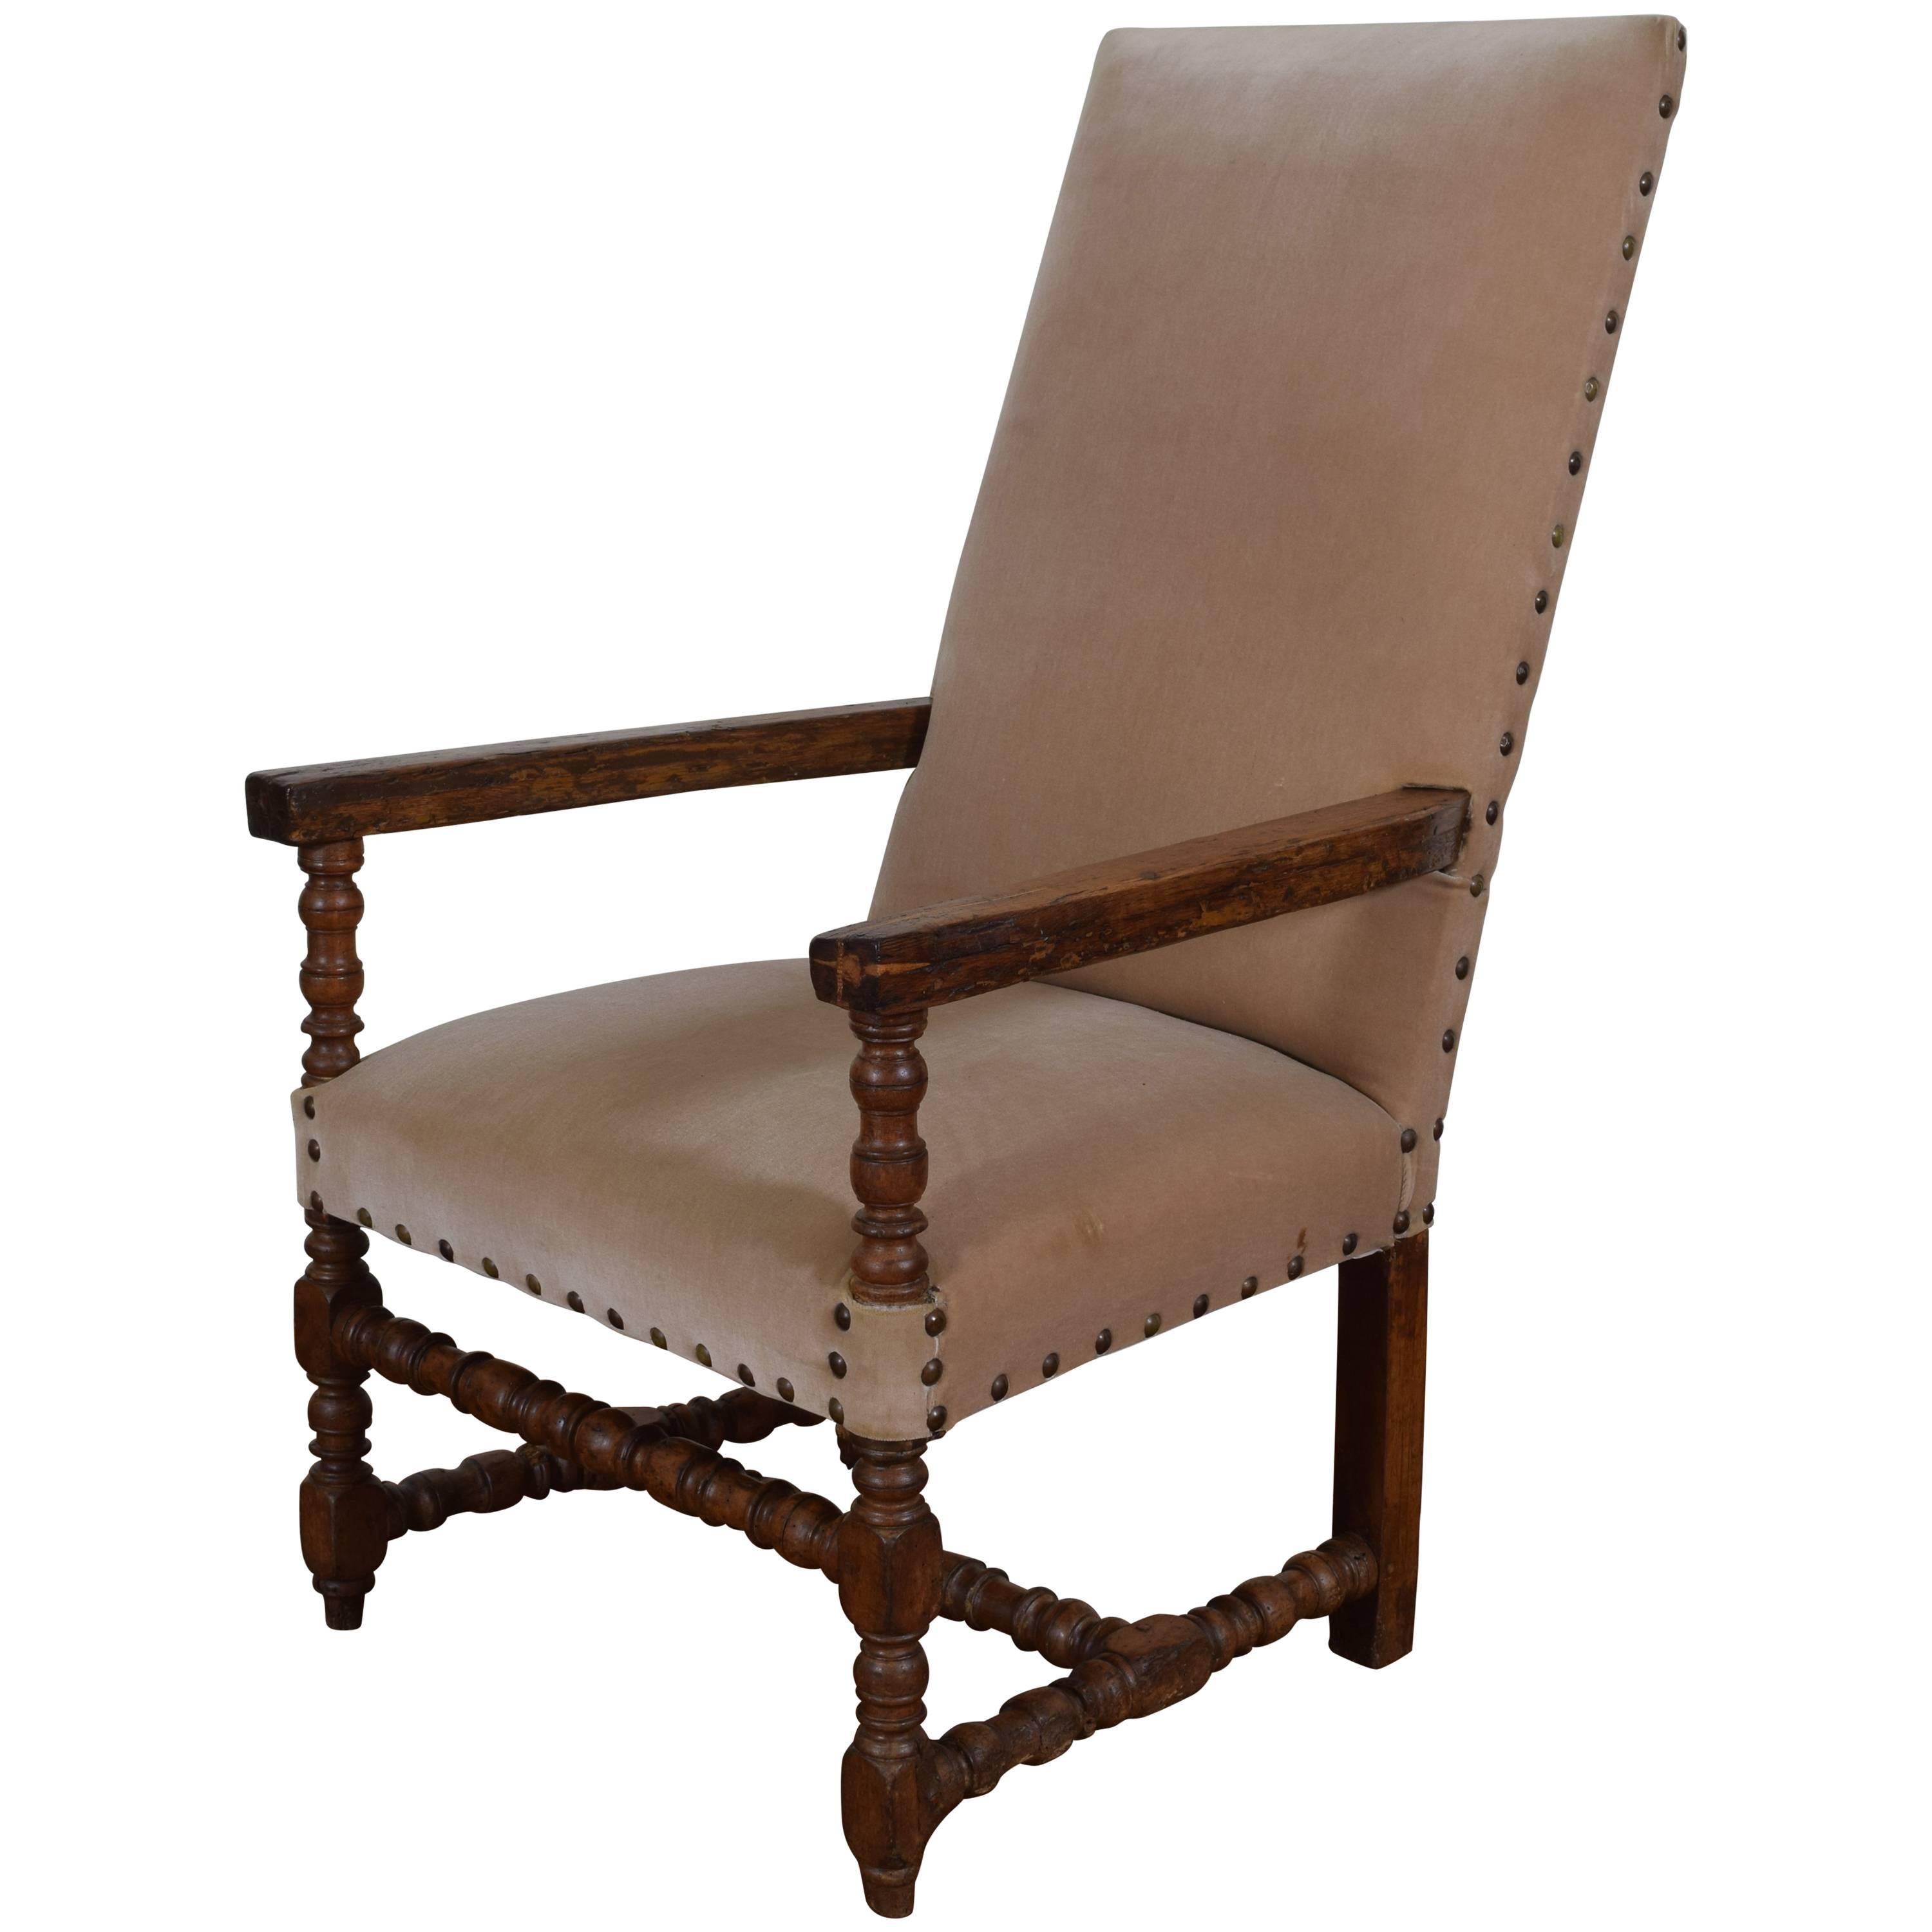 French Walnut and Upholstered Fauteuil, 18th Century